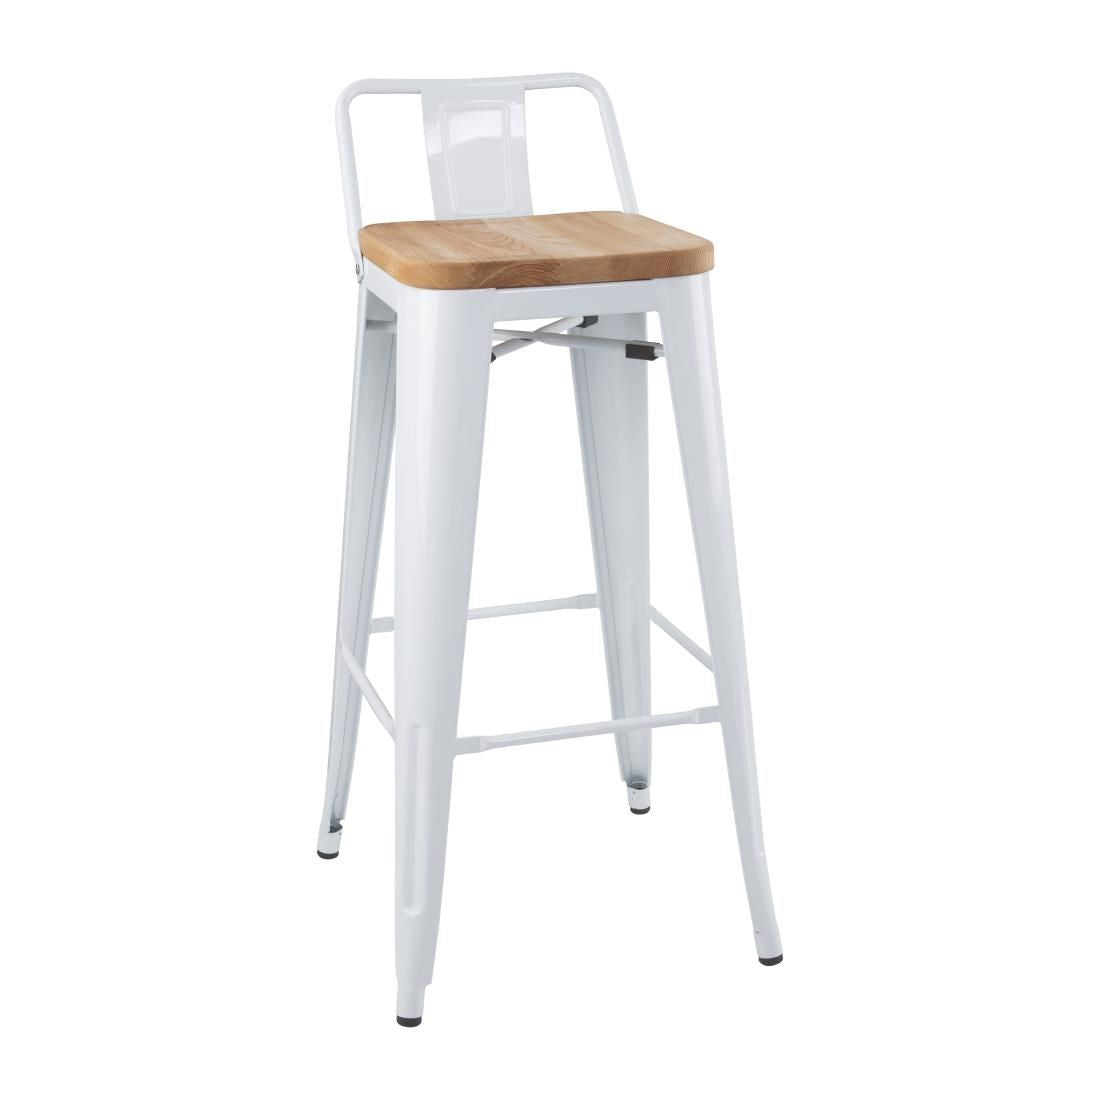 Bolero Bistro Backrest High Stools with Wooden Seat Pad (Pack of 4) JD Catering Equipment Solutions Ltd